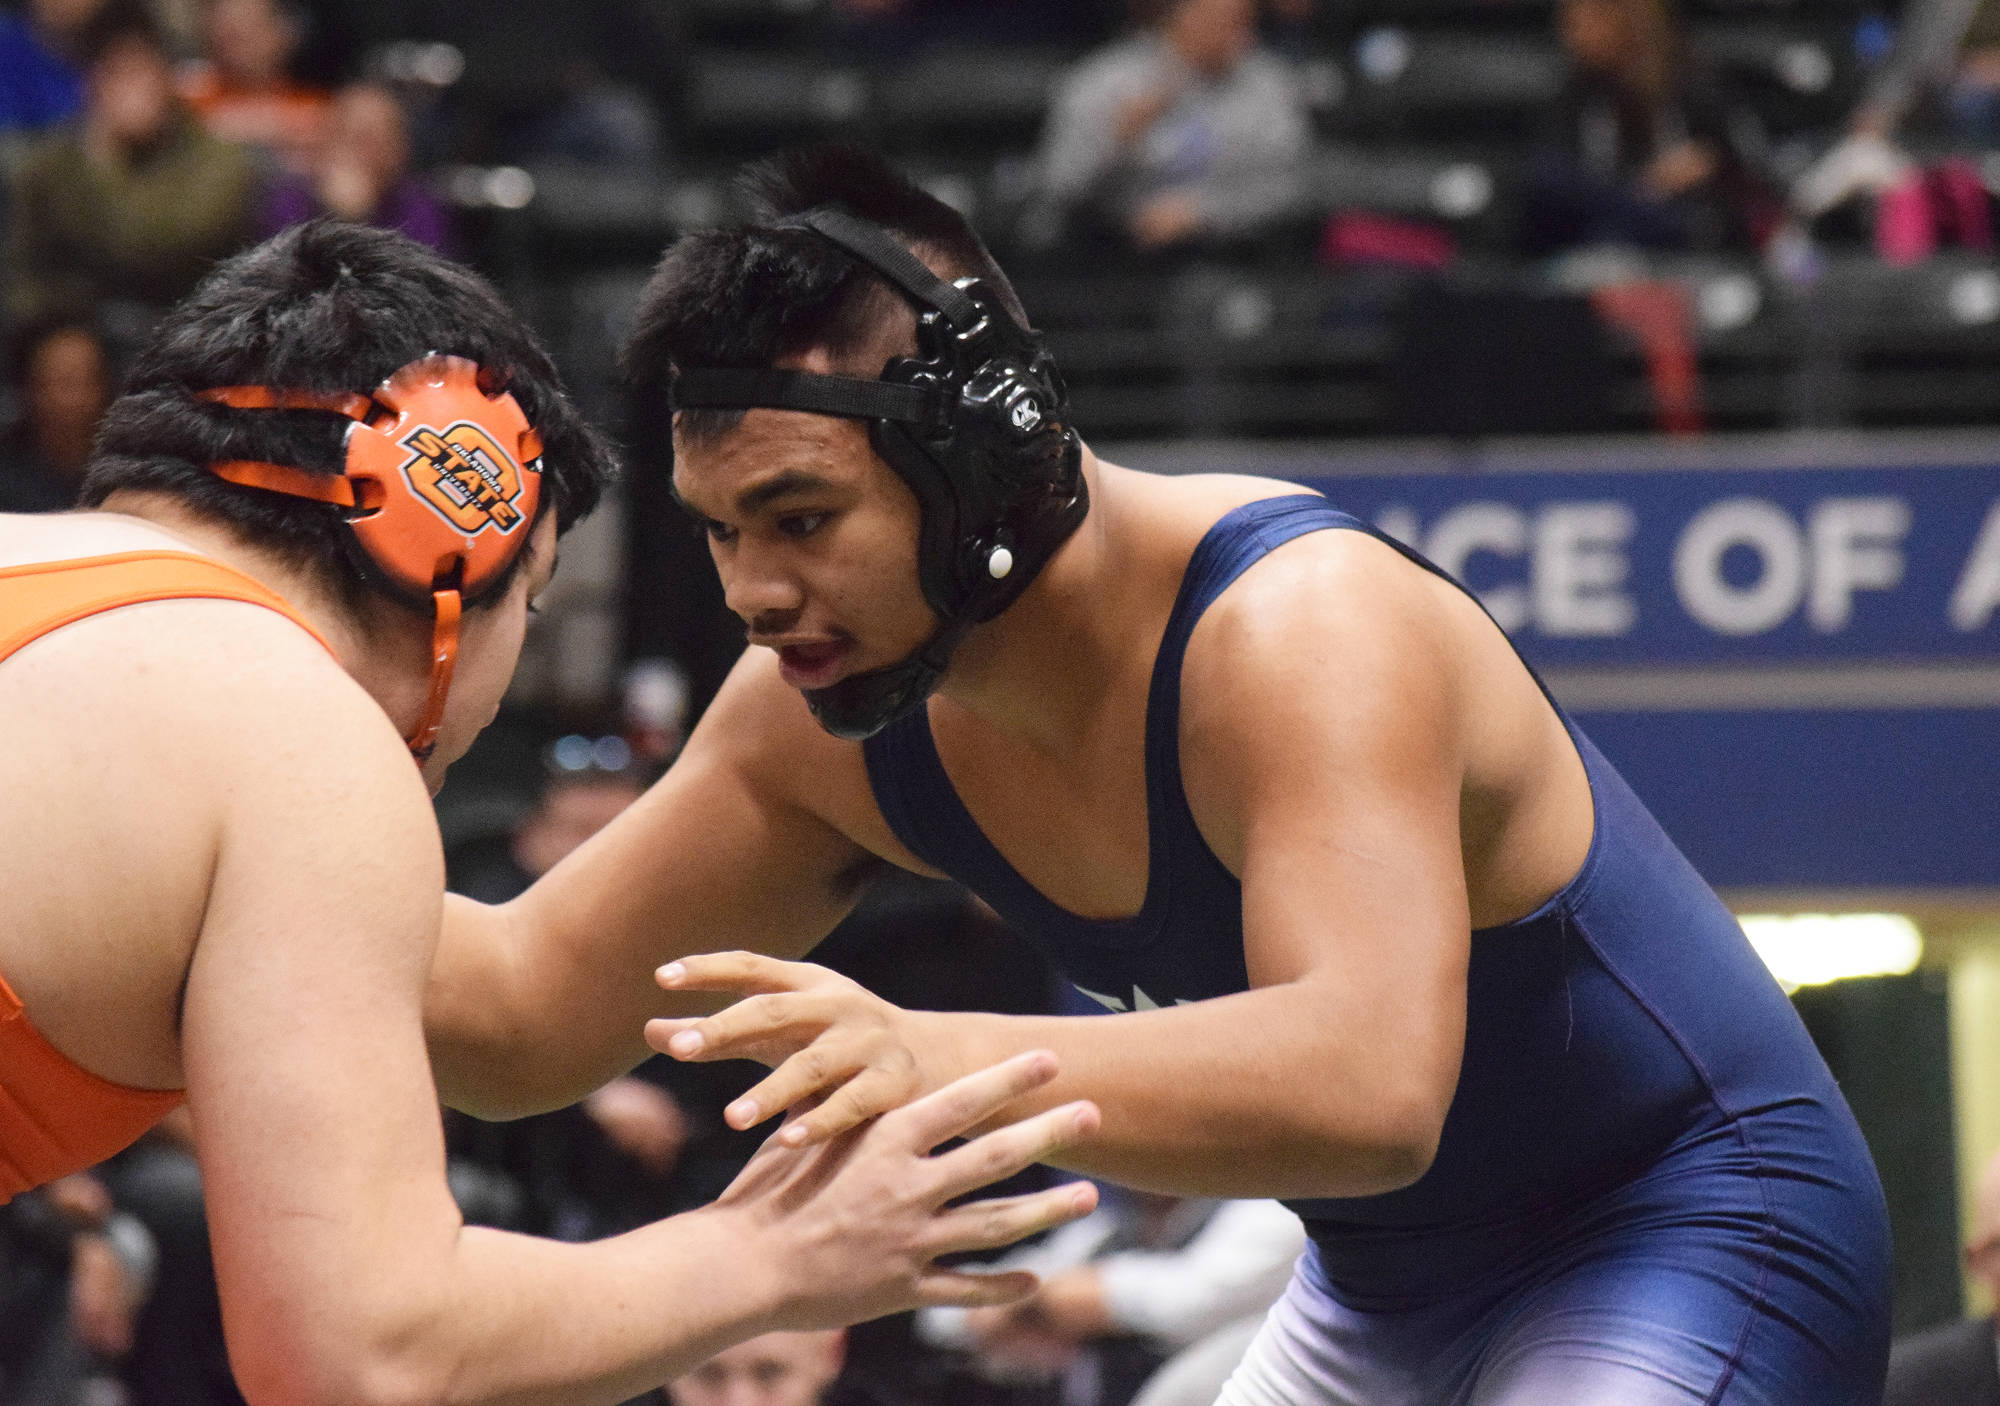 Soldotna senior Aaron Faletoi anticipates the moves of West Anchorage’s Kelton Mock in the 215-pound final Saturday night at the Div. I state wrestling championships at the Alaska Airlines Center in Anchorage. (Photo by Joey Klecka/Peninsula Clarion)